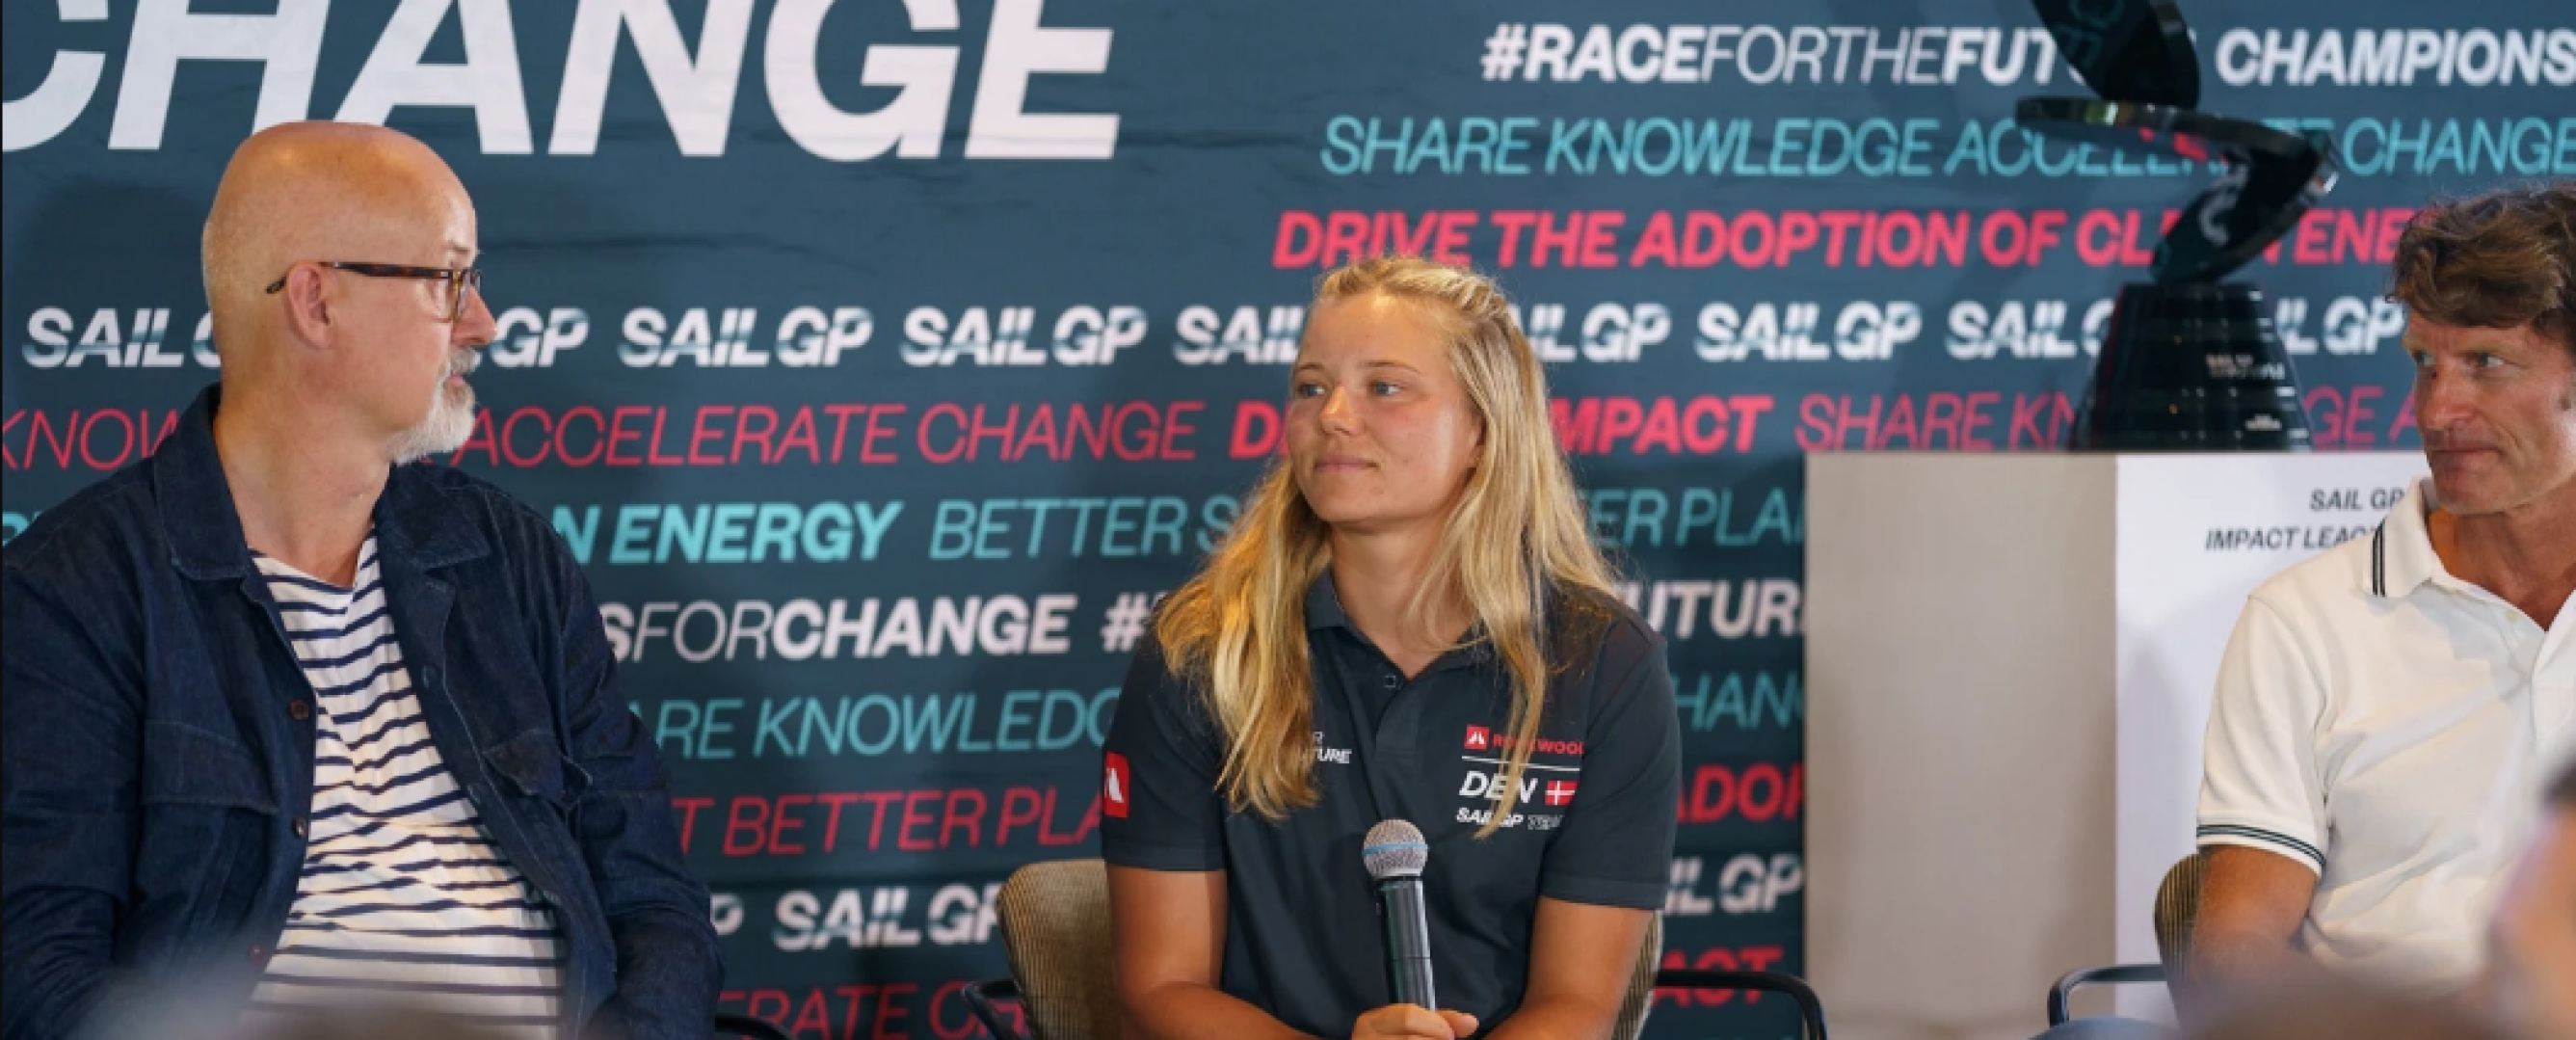 Anne-Marie Rindom joins environmentalists at Sailgp